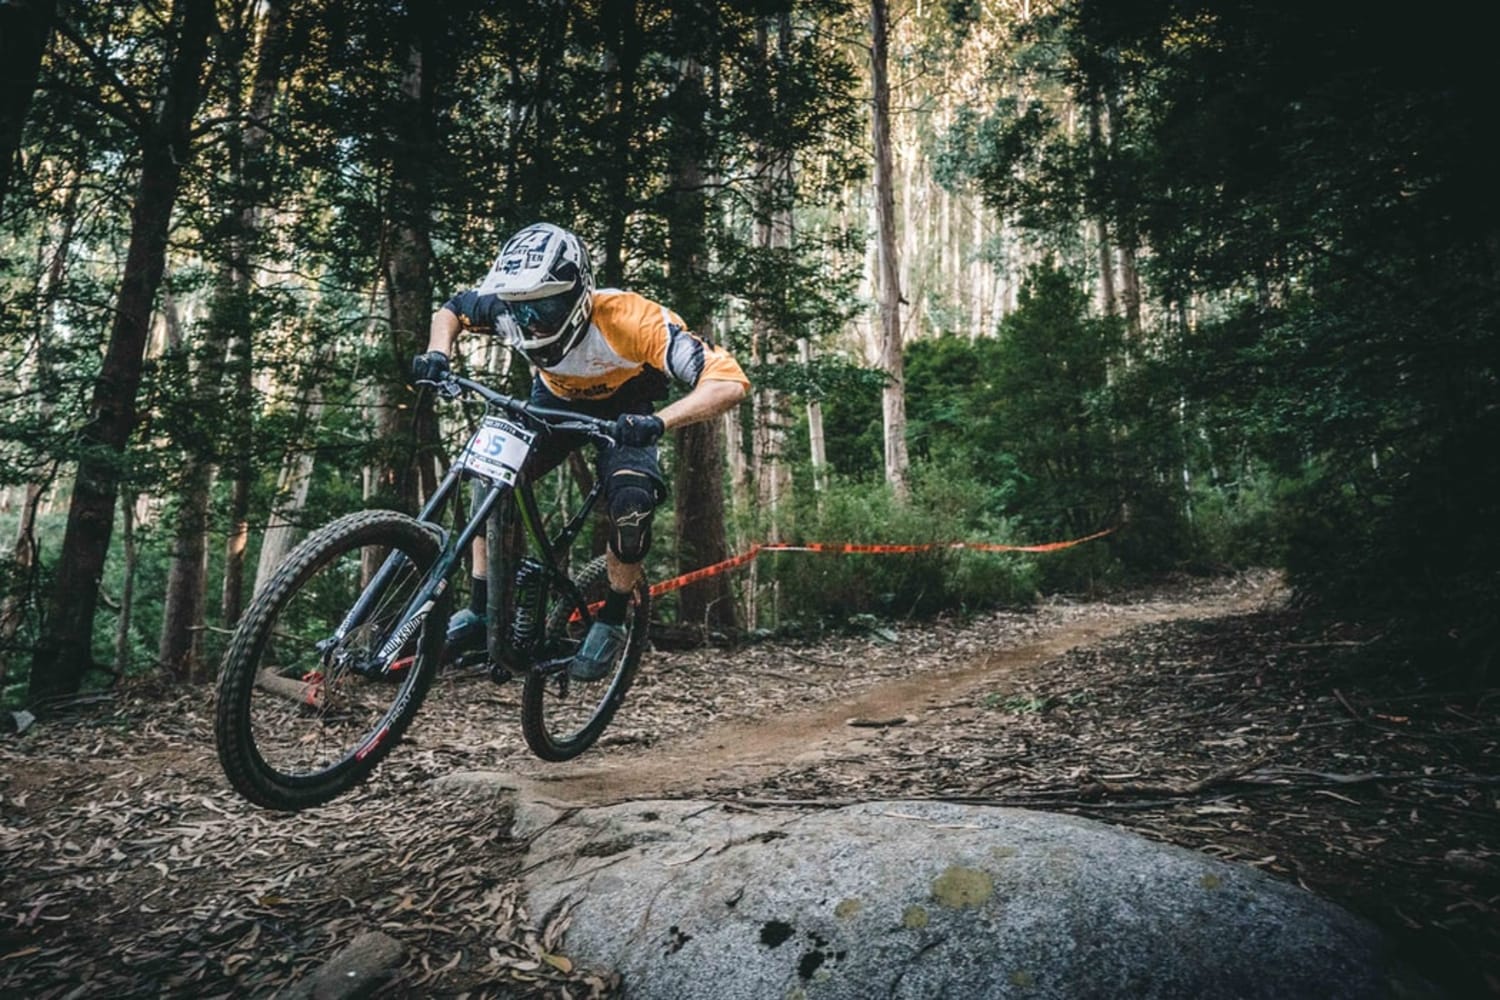 Best MTB trails in Australia: The top 7 